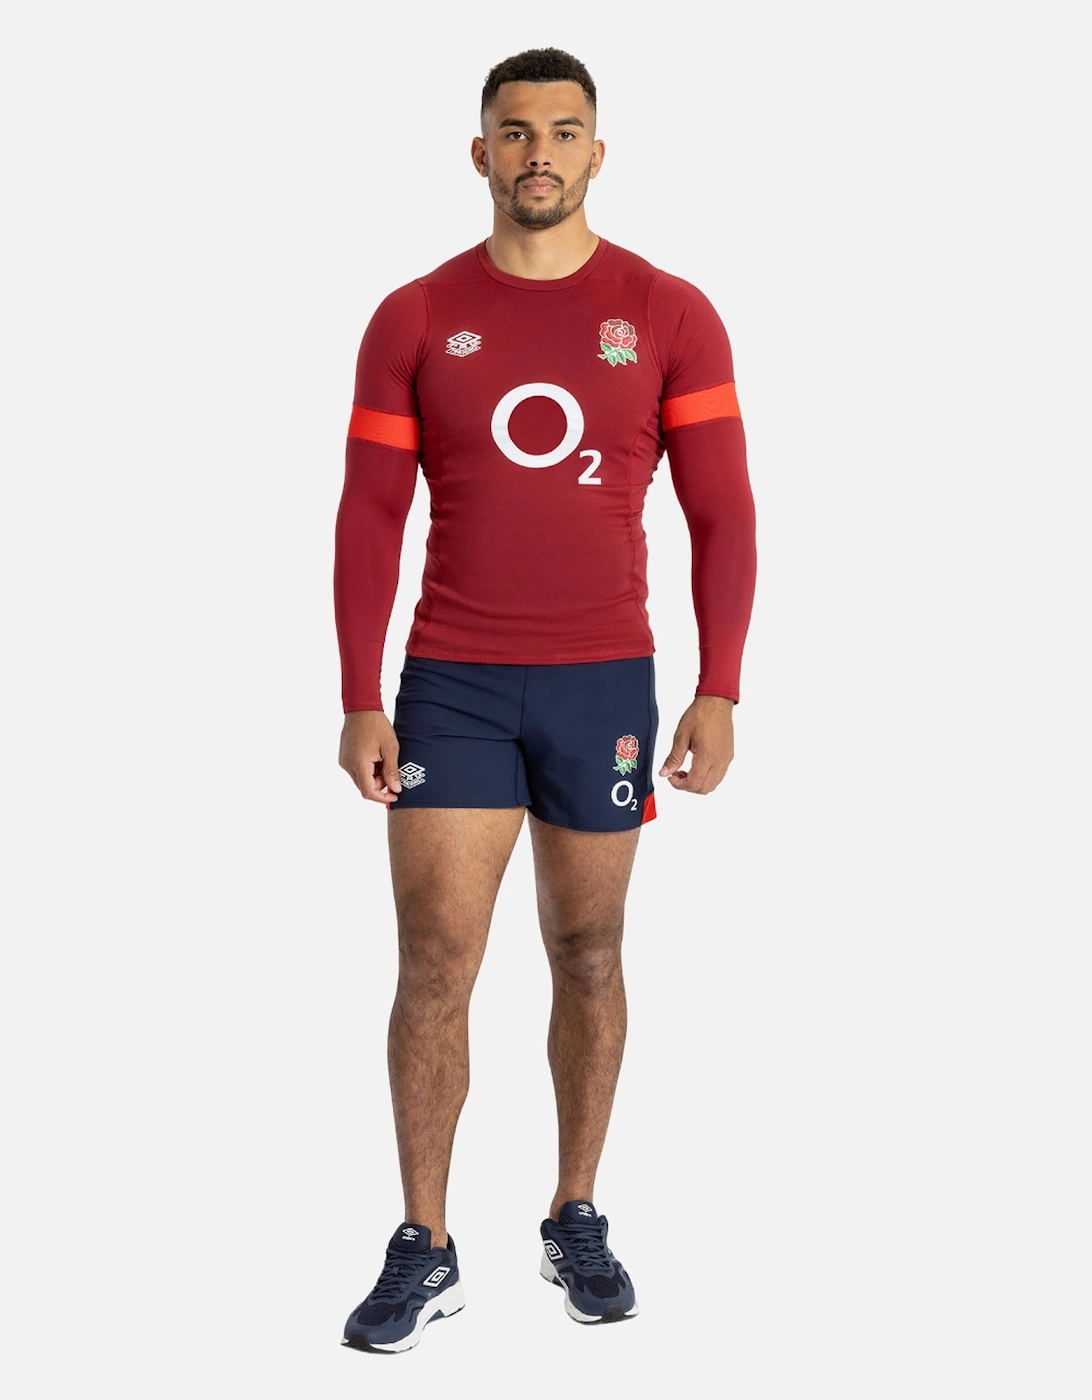 Mens 23/24 England Rugby Long-Sleeved Training Contact Jersey